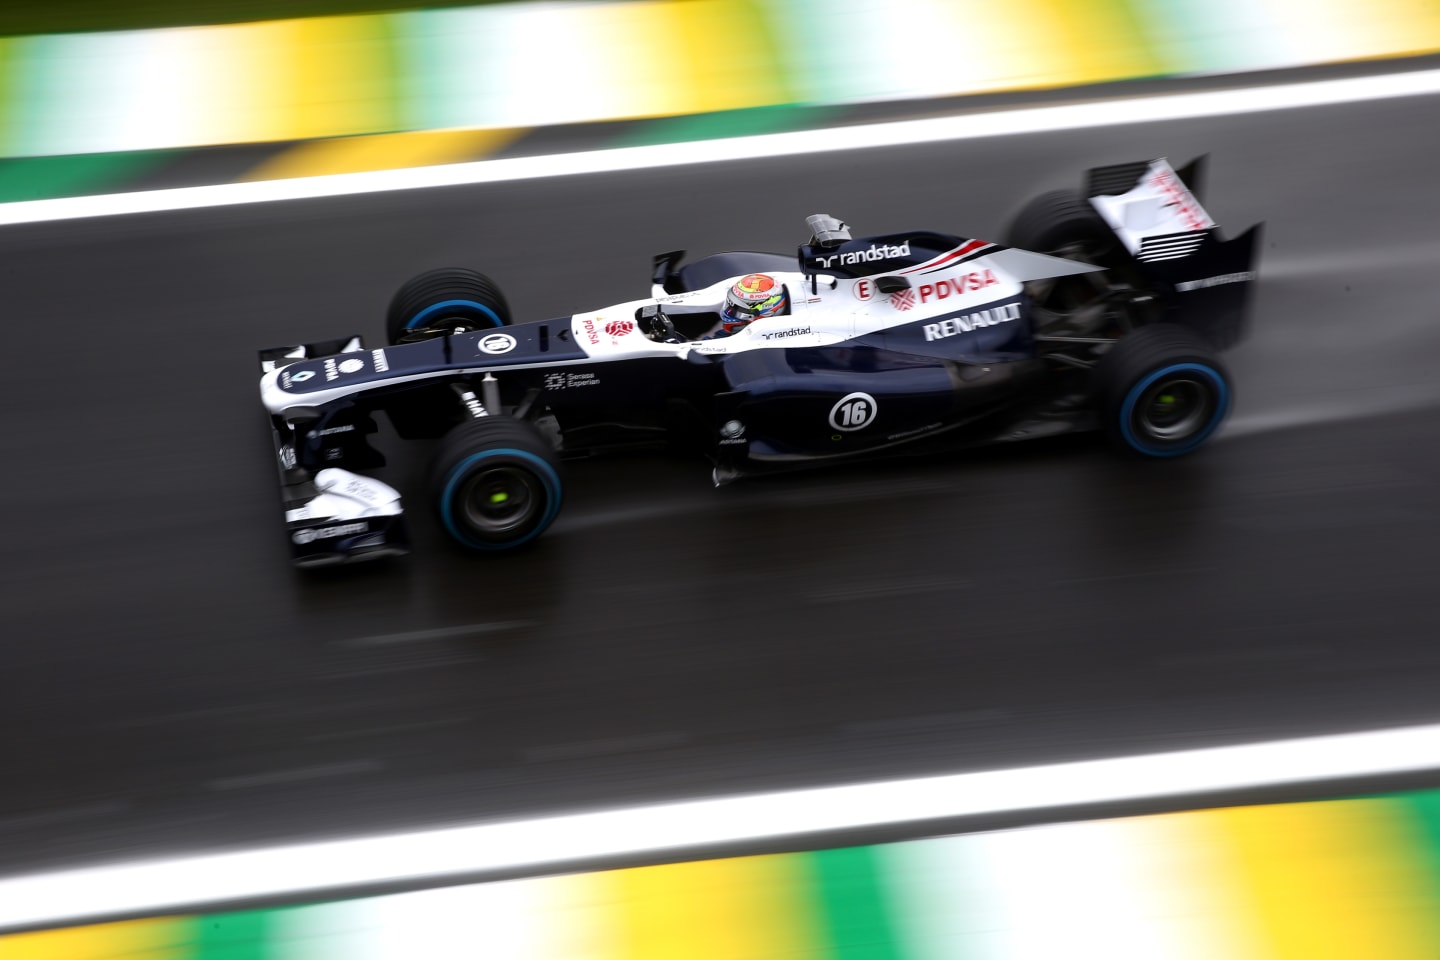 2013 marked the final year of navy blue and white on Williams' cars as the team had a new title sponsor on board